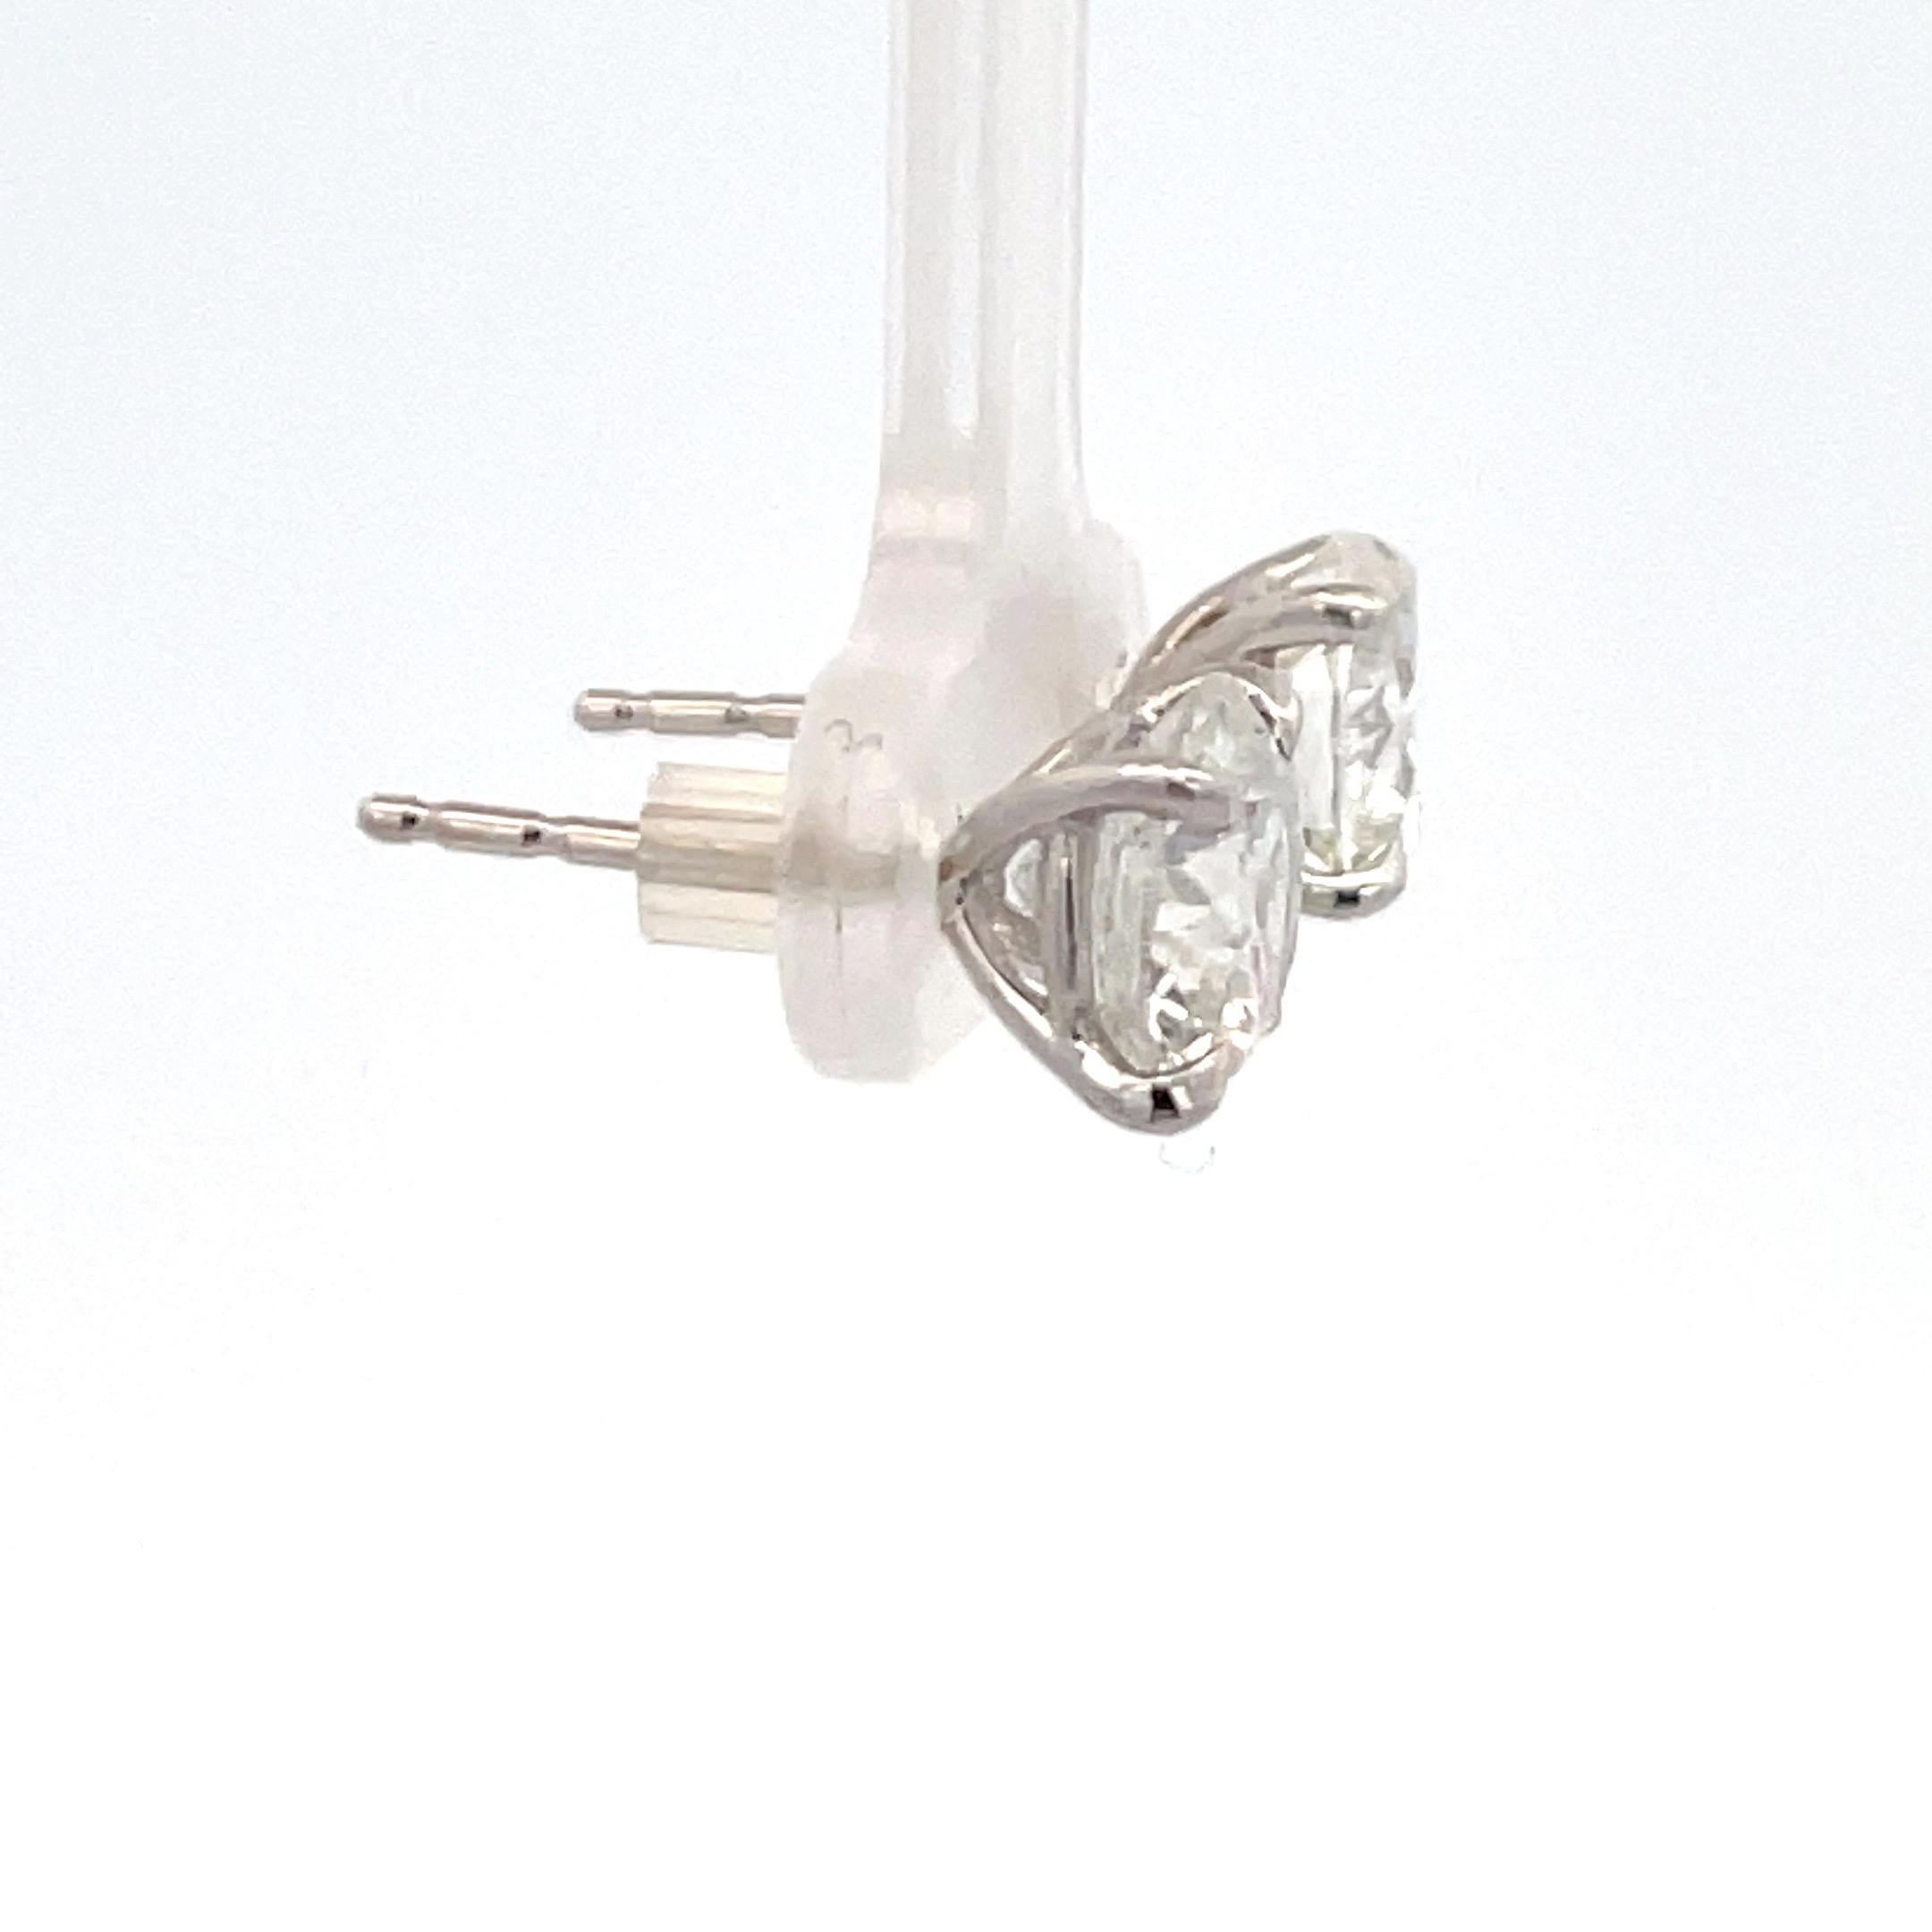 Diamond stud earrings weighing 4.06 Carats, Color G-H, Clarity I1-I2, in 18 Karat White Gold 4 prong Champagne setting. 
Nice Color, Clean to Eye 8/10, Nice Life
Setting can be changed to a Basket, Martini or Champagne/ 3 or 4 Prong/ 14 or 18